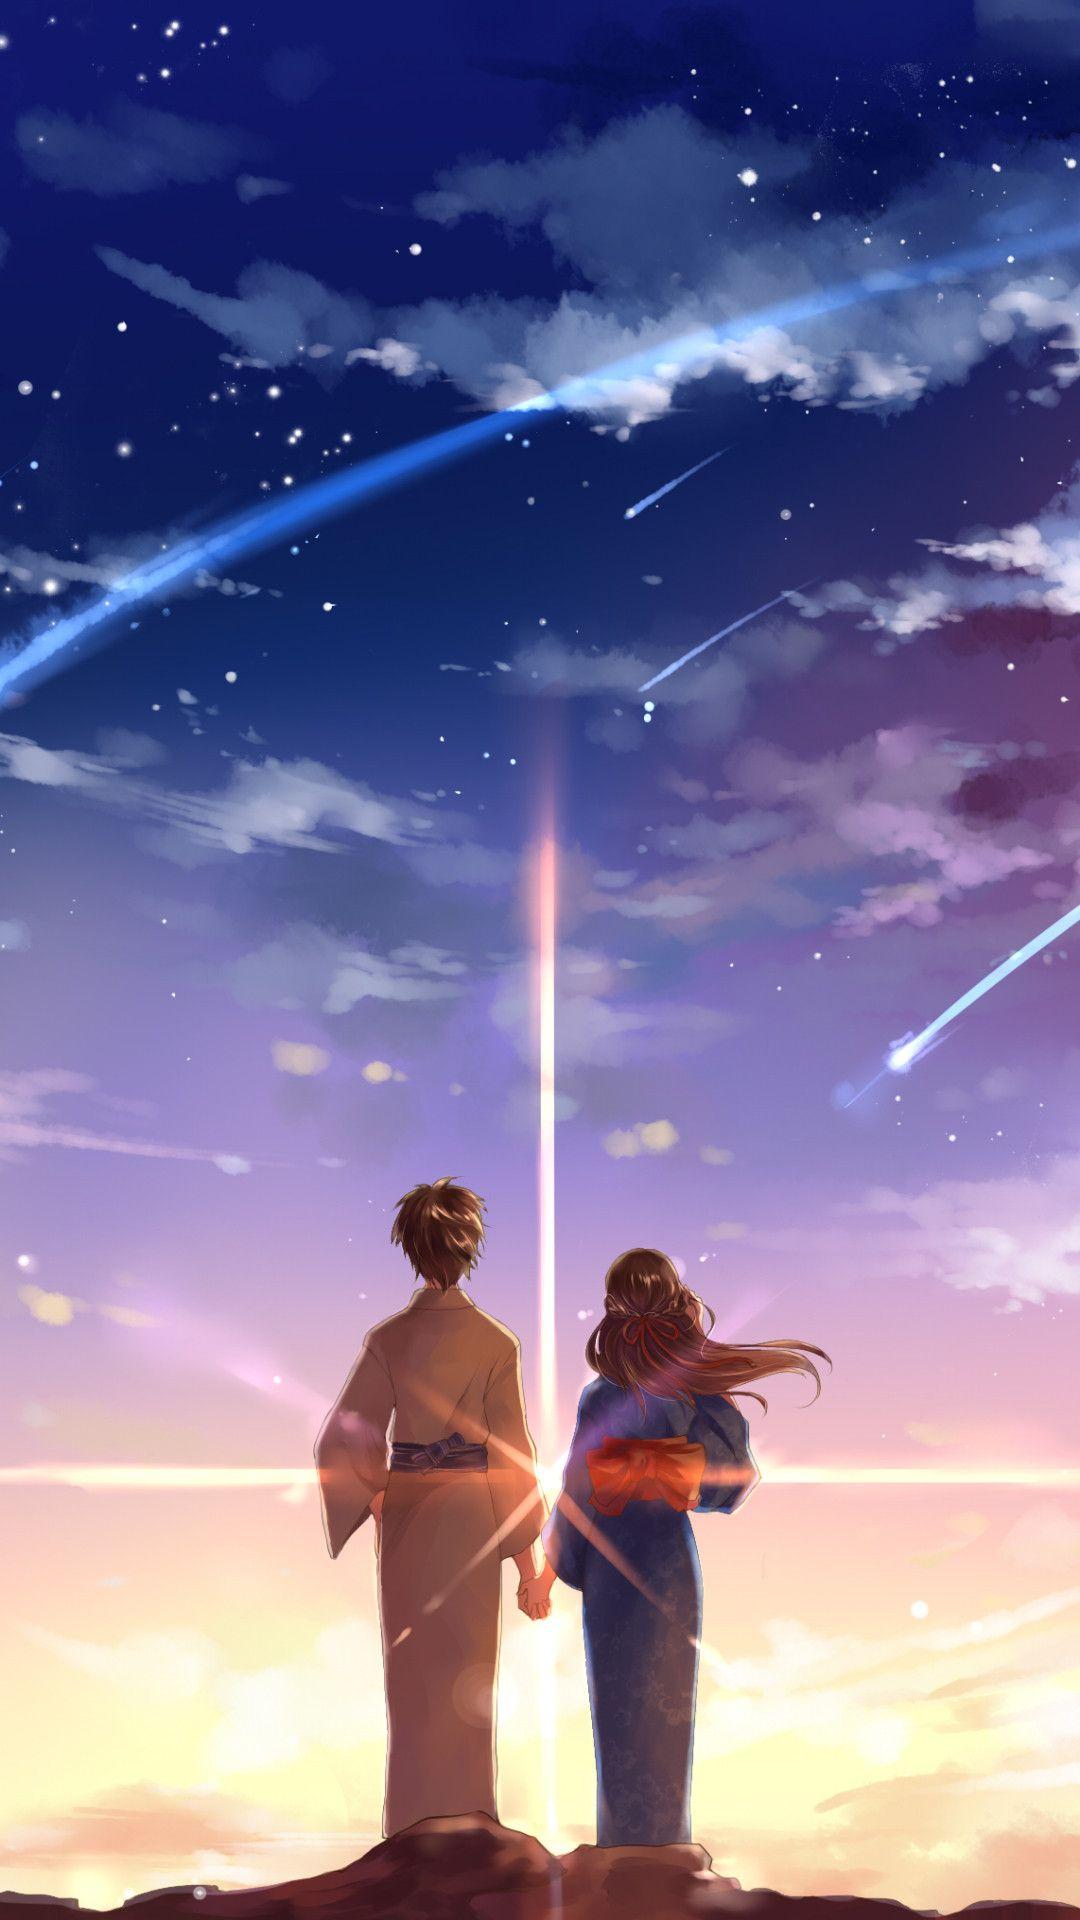 Your Name Live Wallpaper Iphone